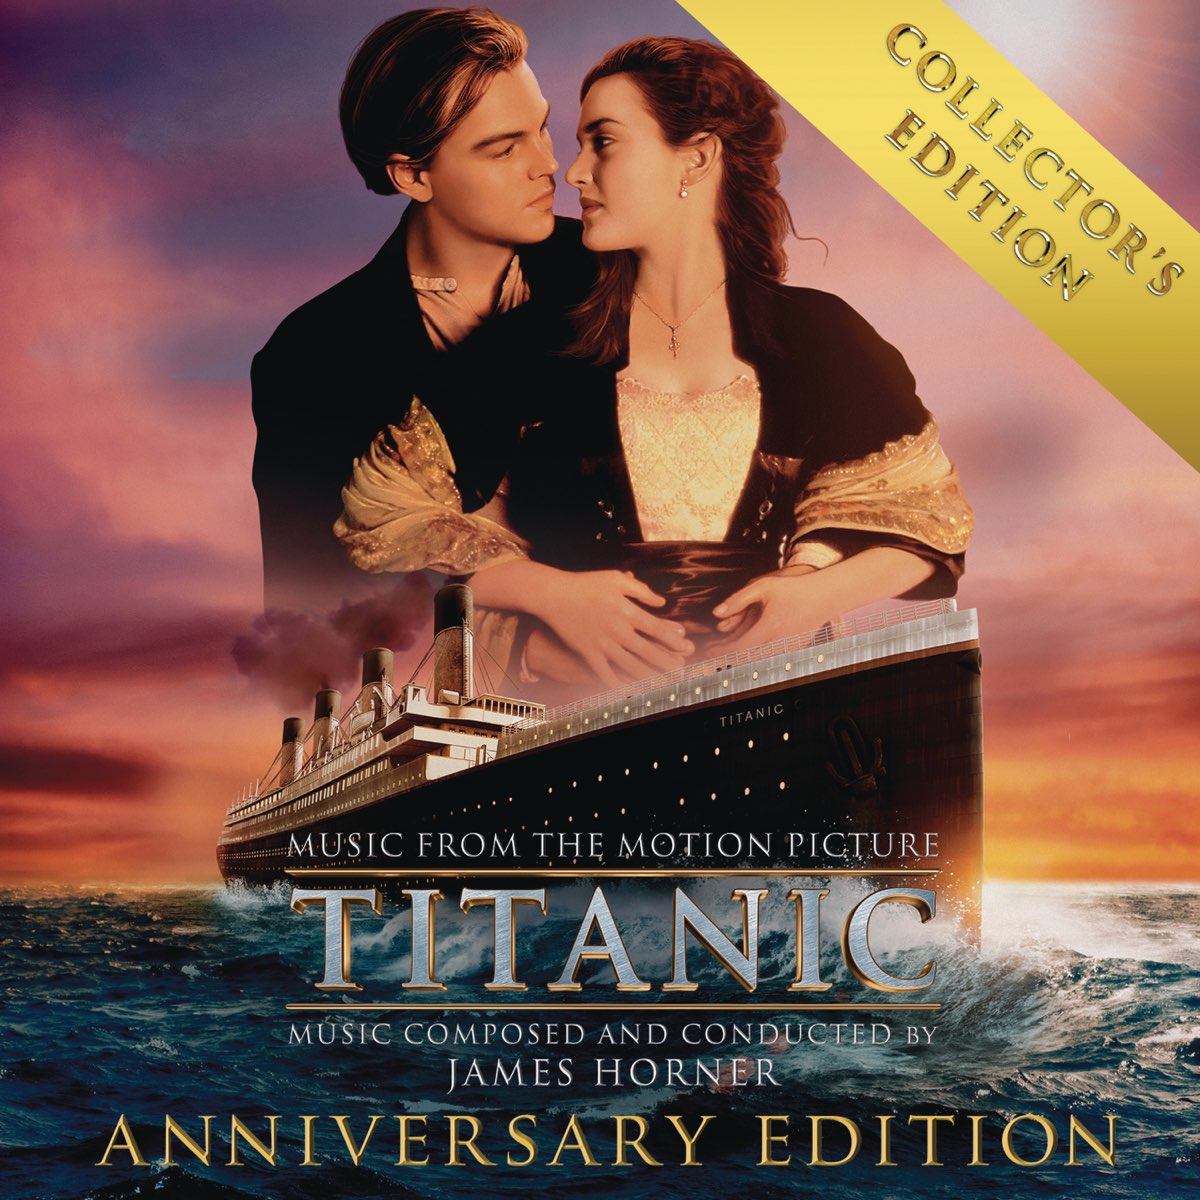 Titanic (Original Motion Picture Soundtrack) [Collector's Anniversary  Edition] by James Horner on Apple Music